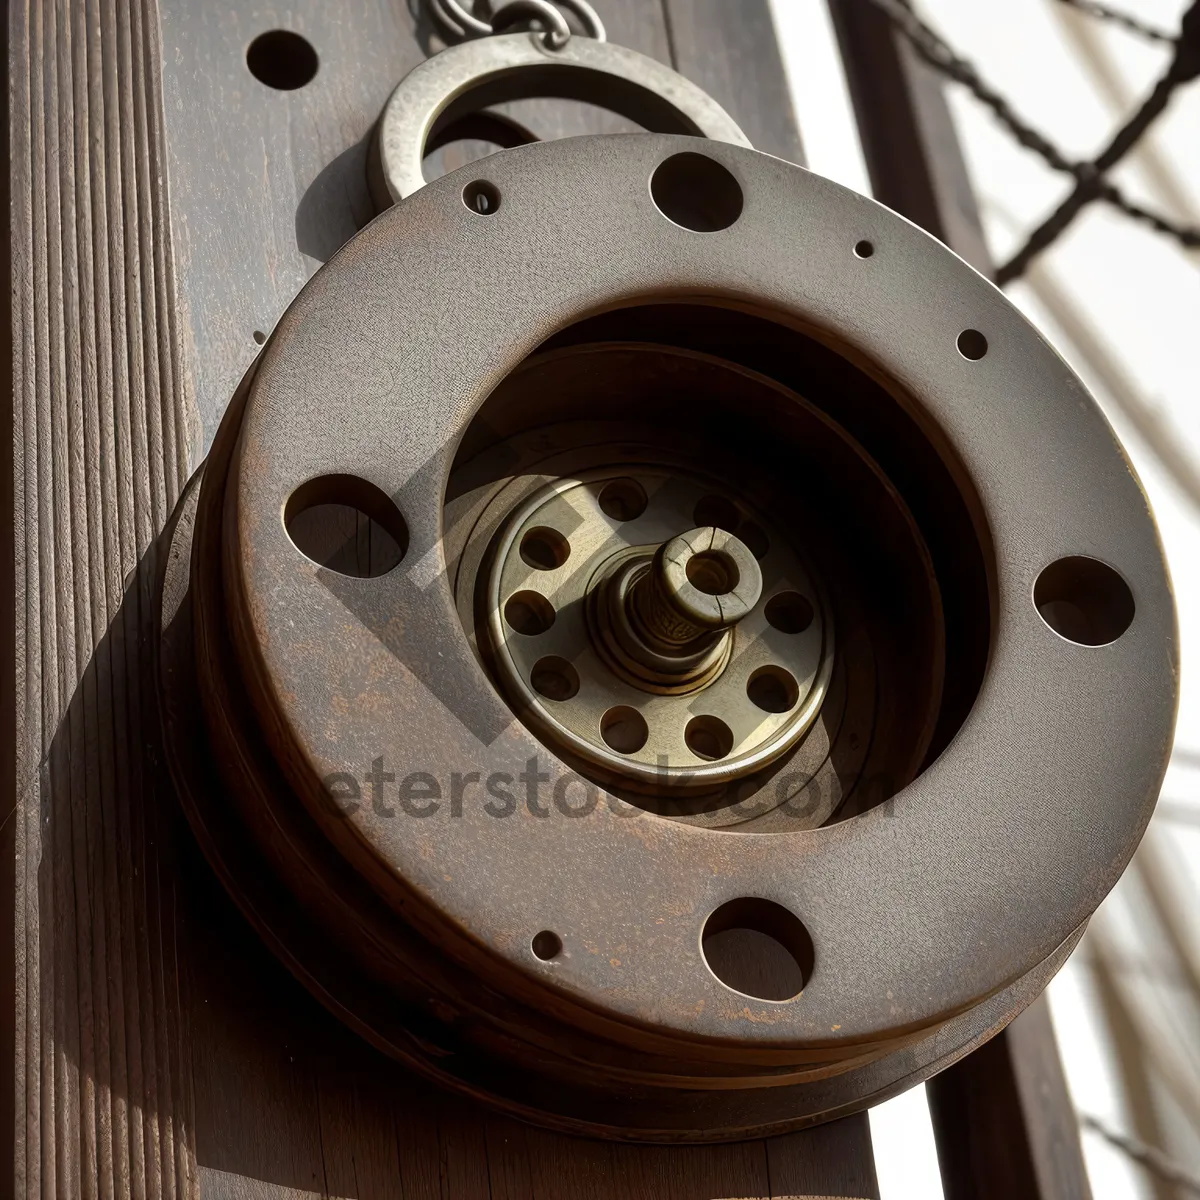 Picture of Steel disk brake technology for mechanical device.